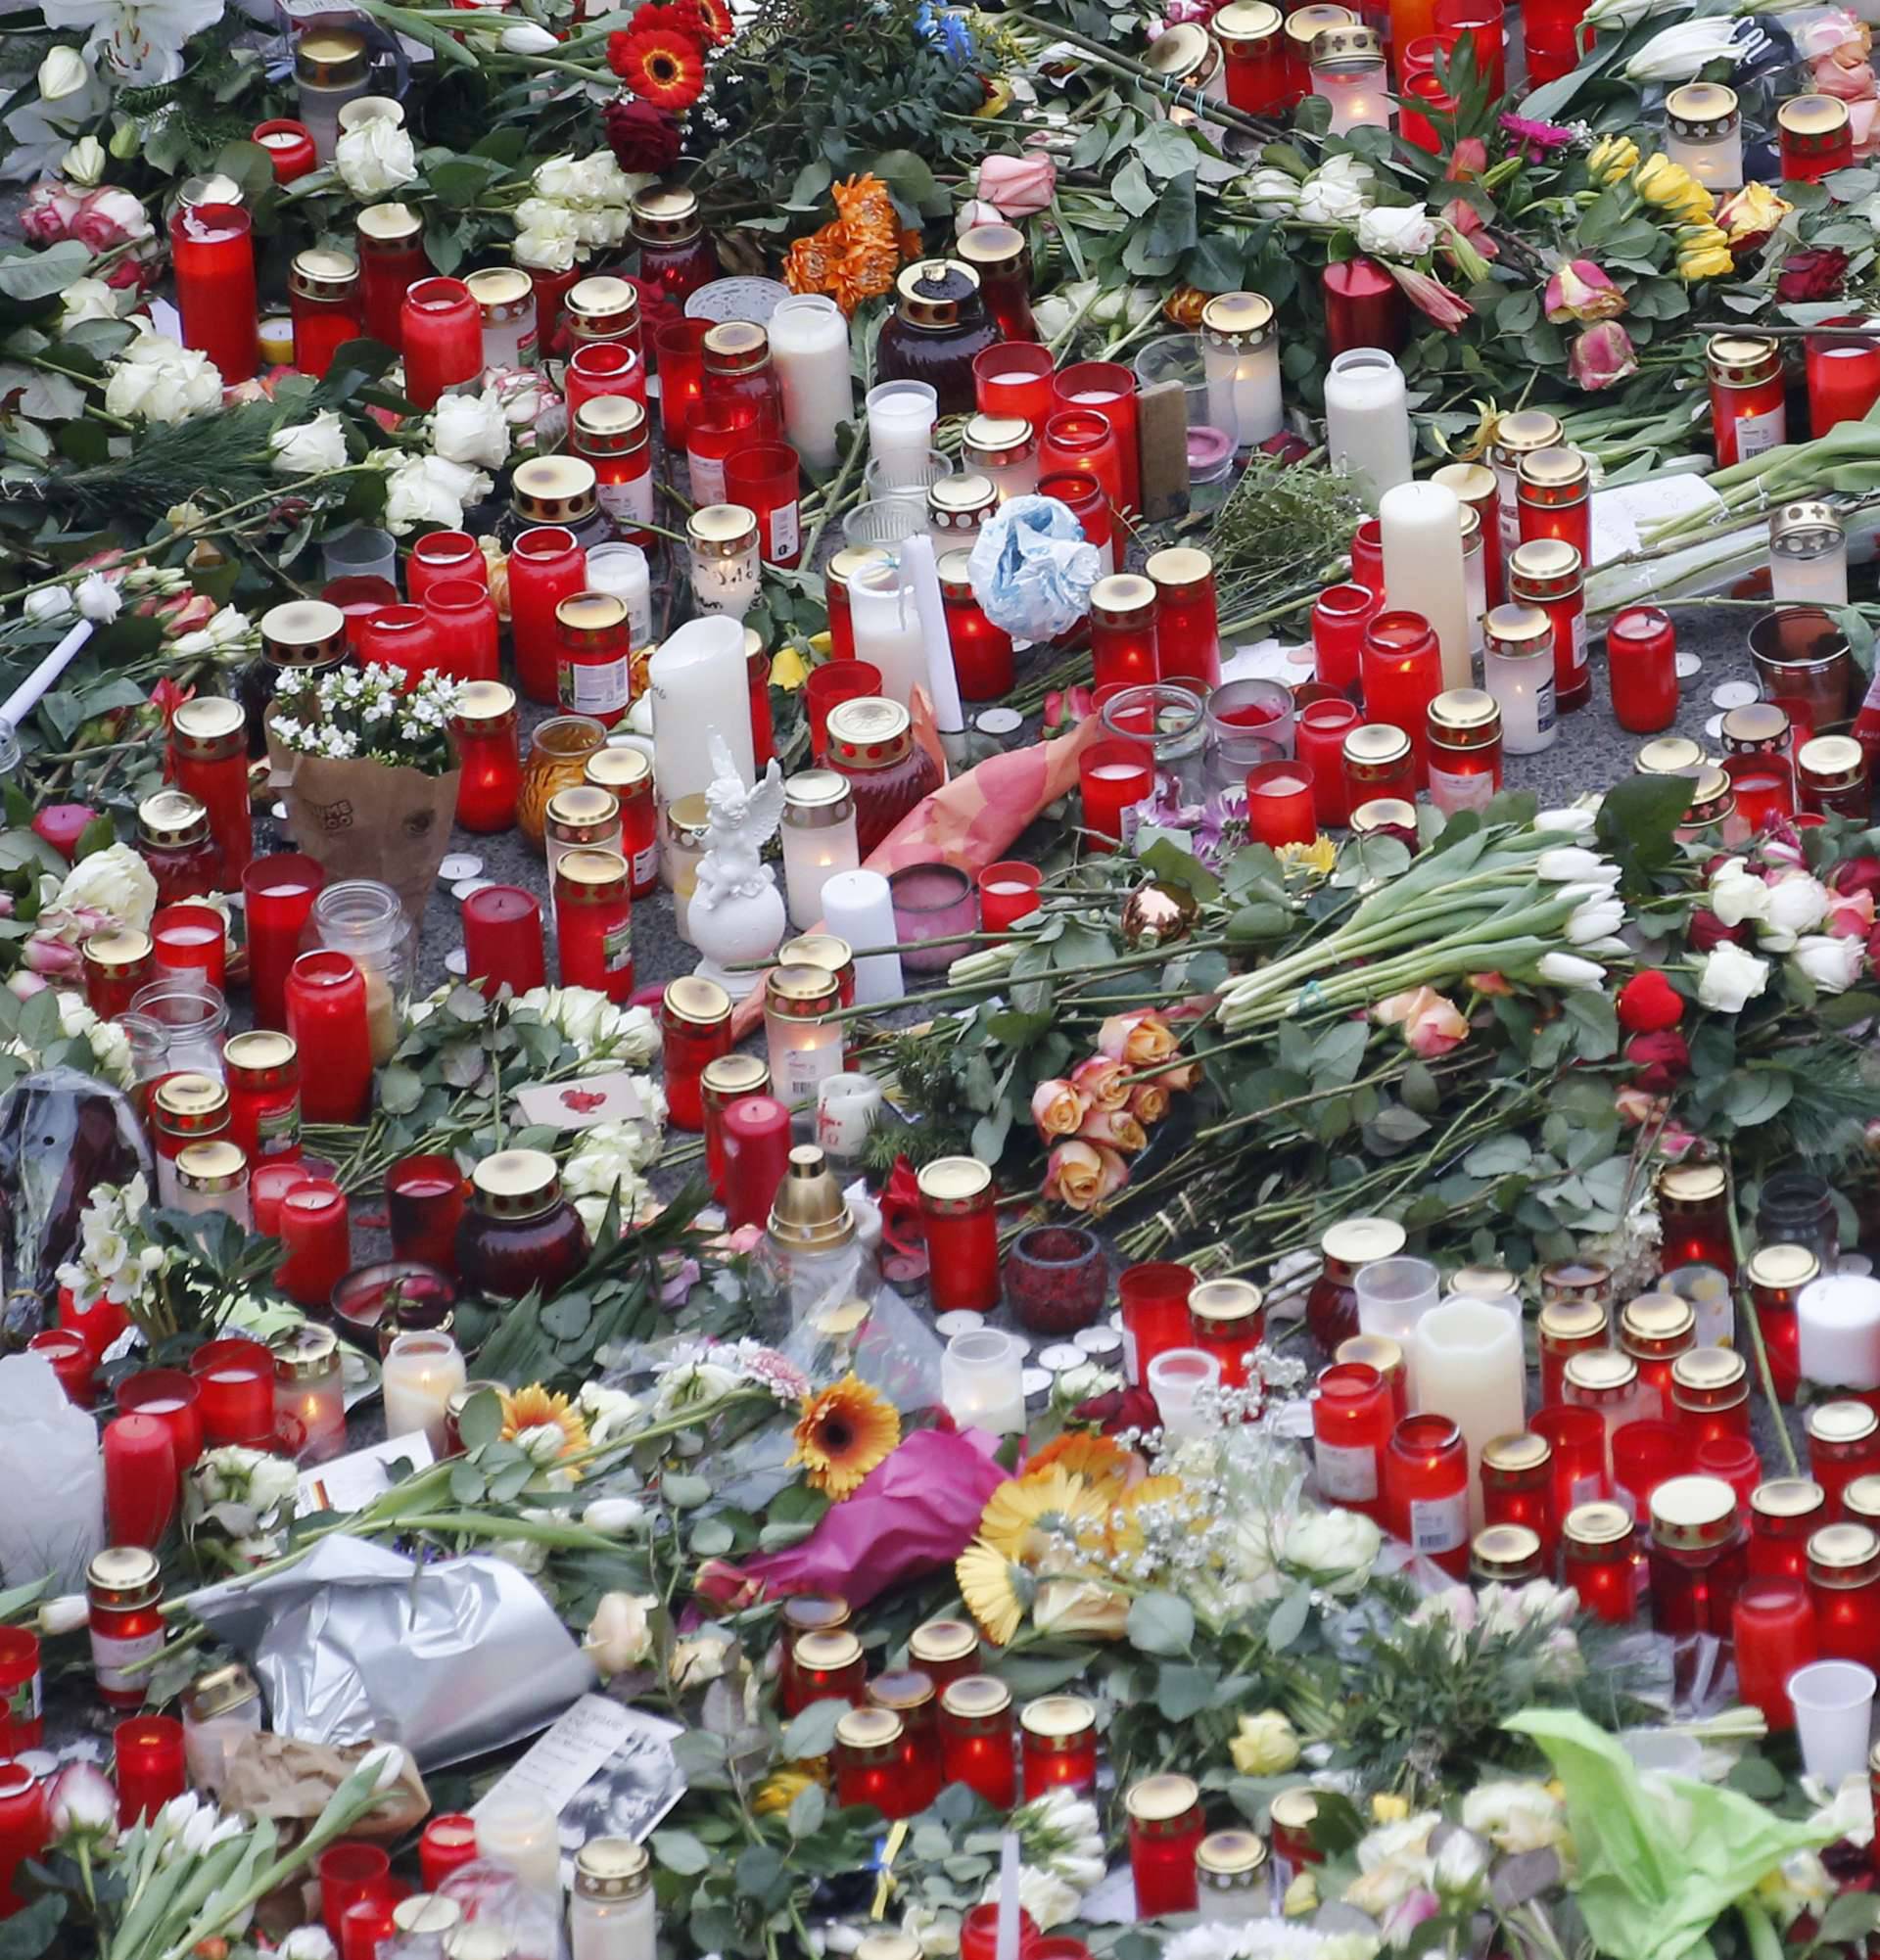 Flowers and candles are placed near the Christmas market in Berlin